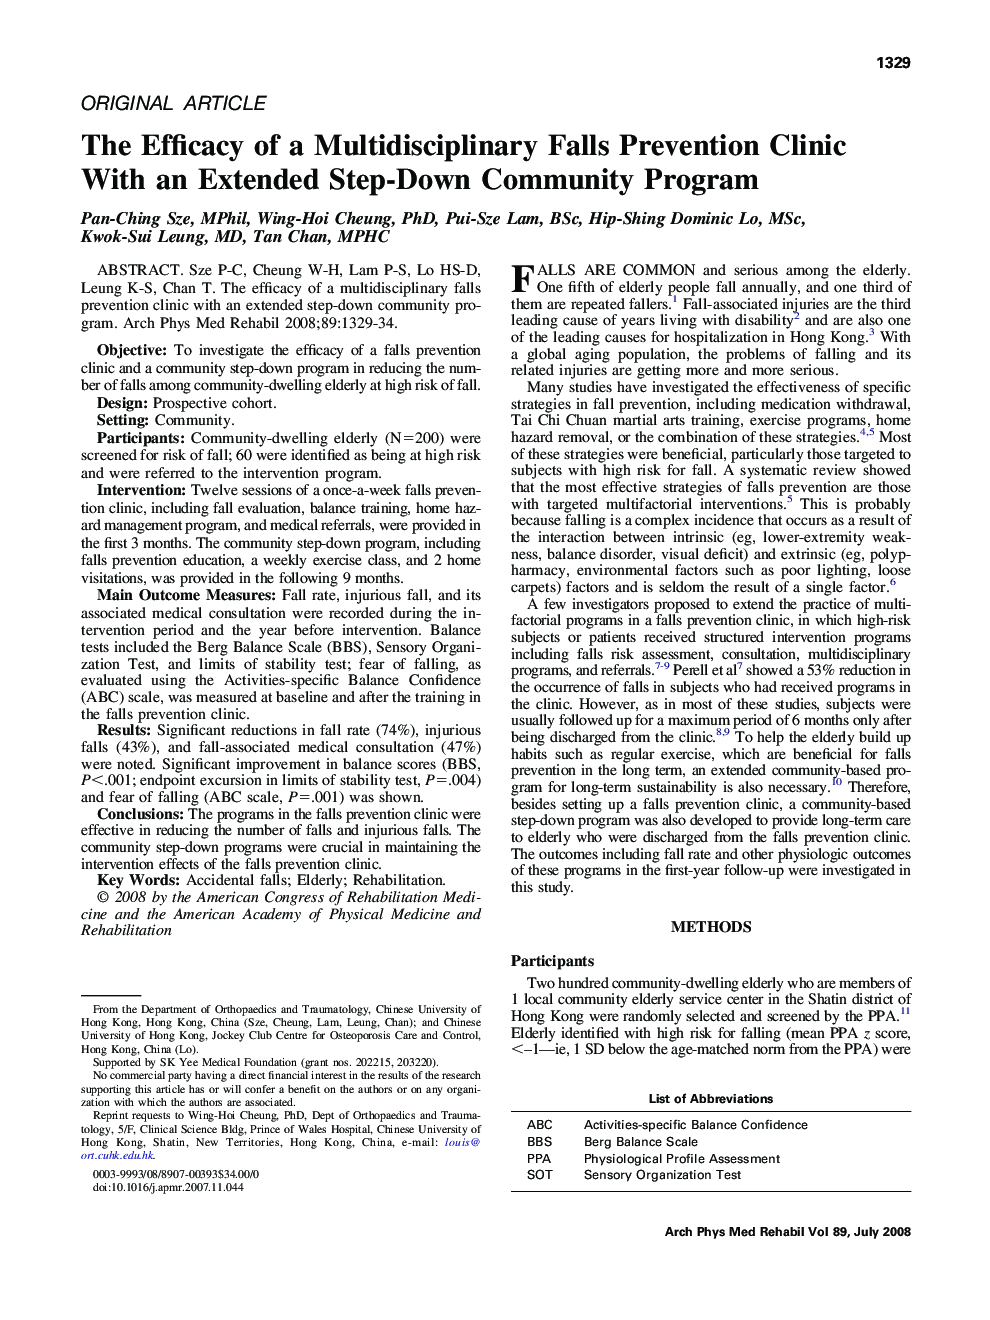 The Efficacy of a Multidisciplinary Falls Prevention Clinic With an Extended Step-Down Community Program 